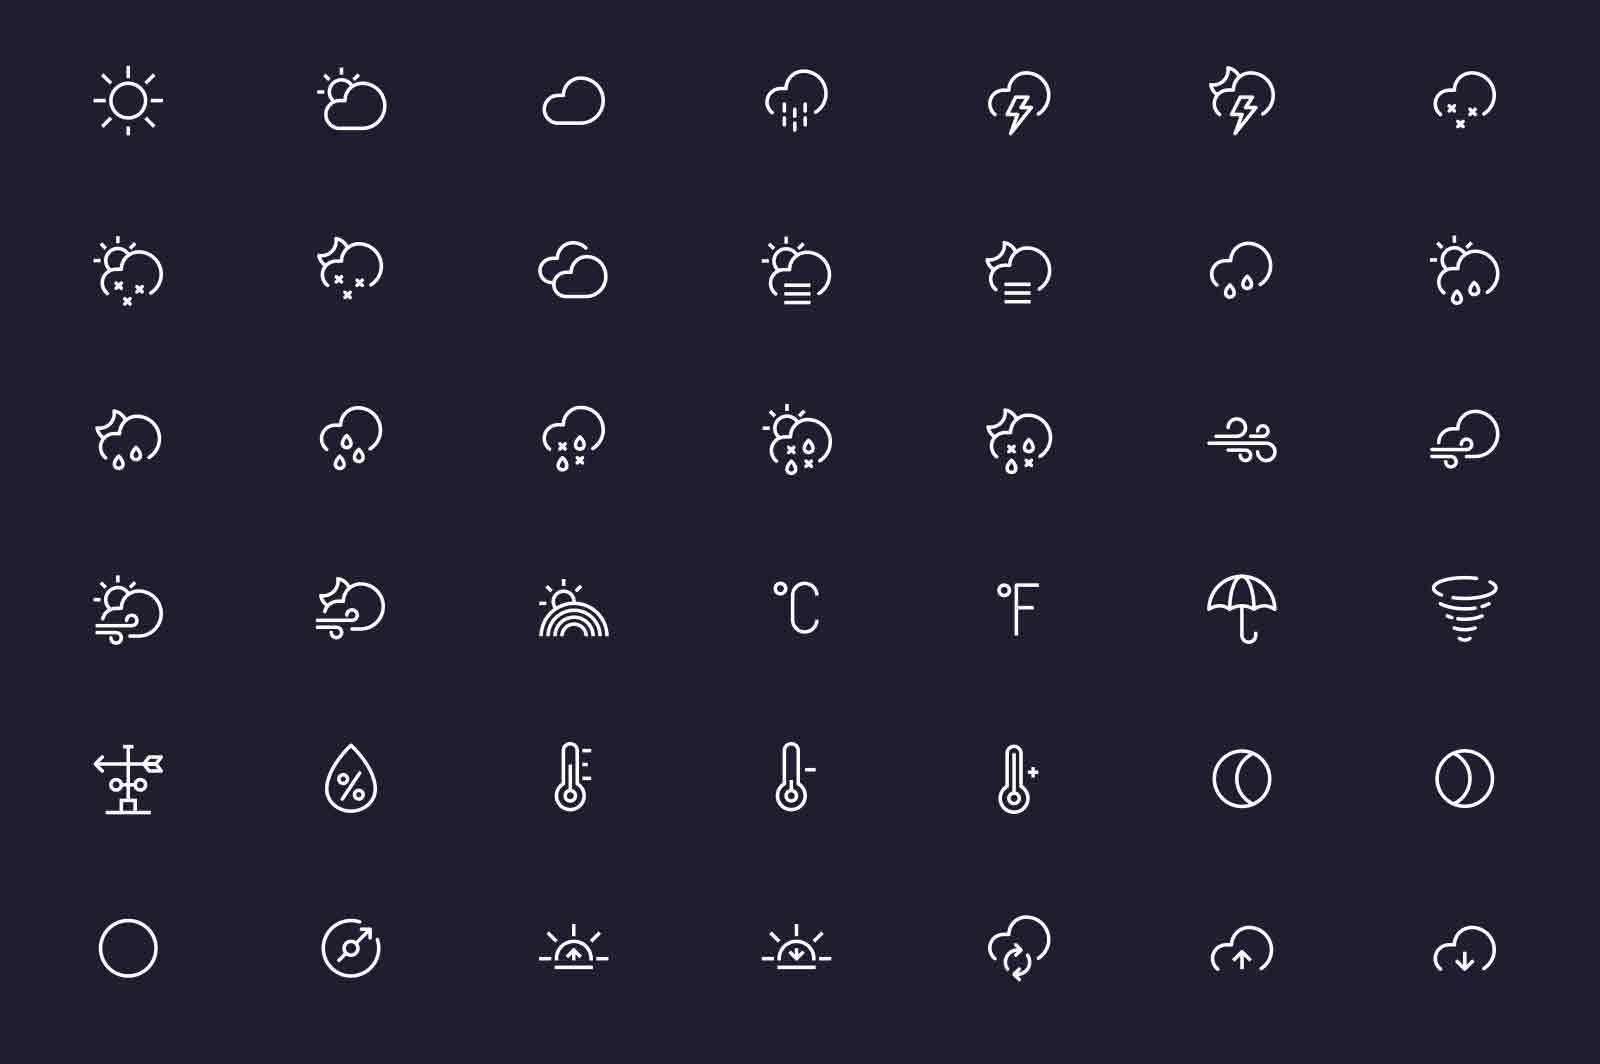 Meteorological weather forecast icons set vector illustration. Sun, clouds, snowflakes, wind, rainbow, moon line icon. Dark background